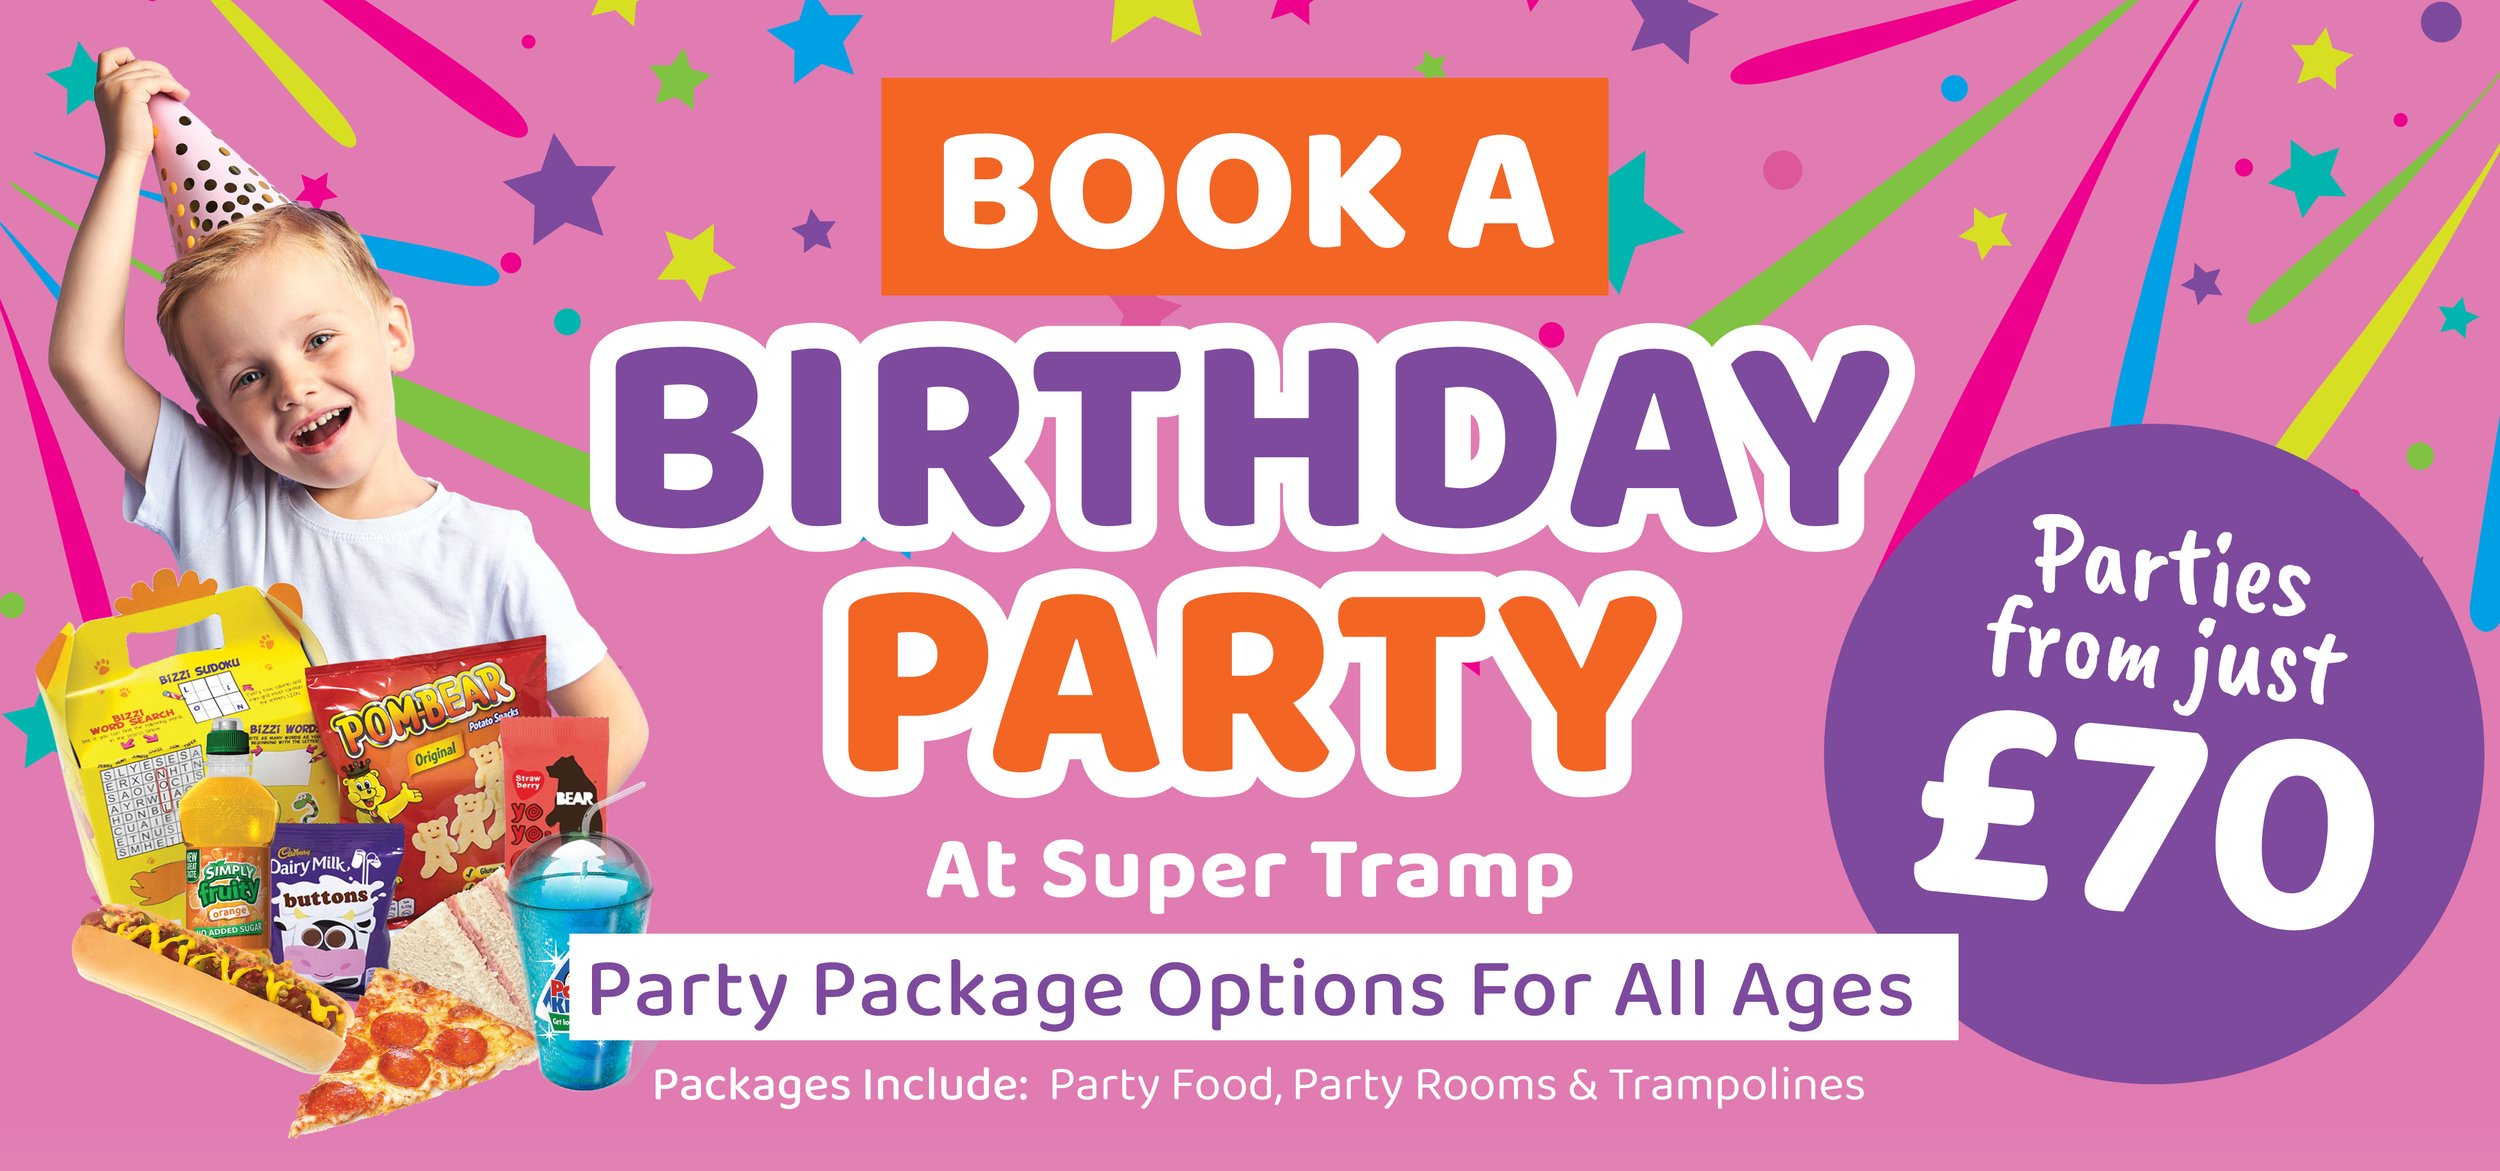 Book A Birthday Party - Website Banners .jpg